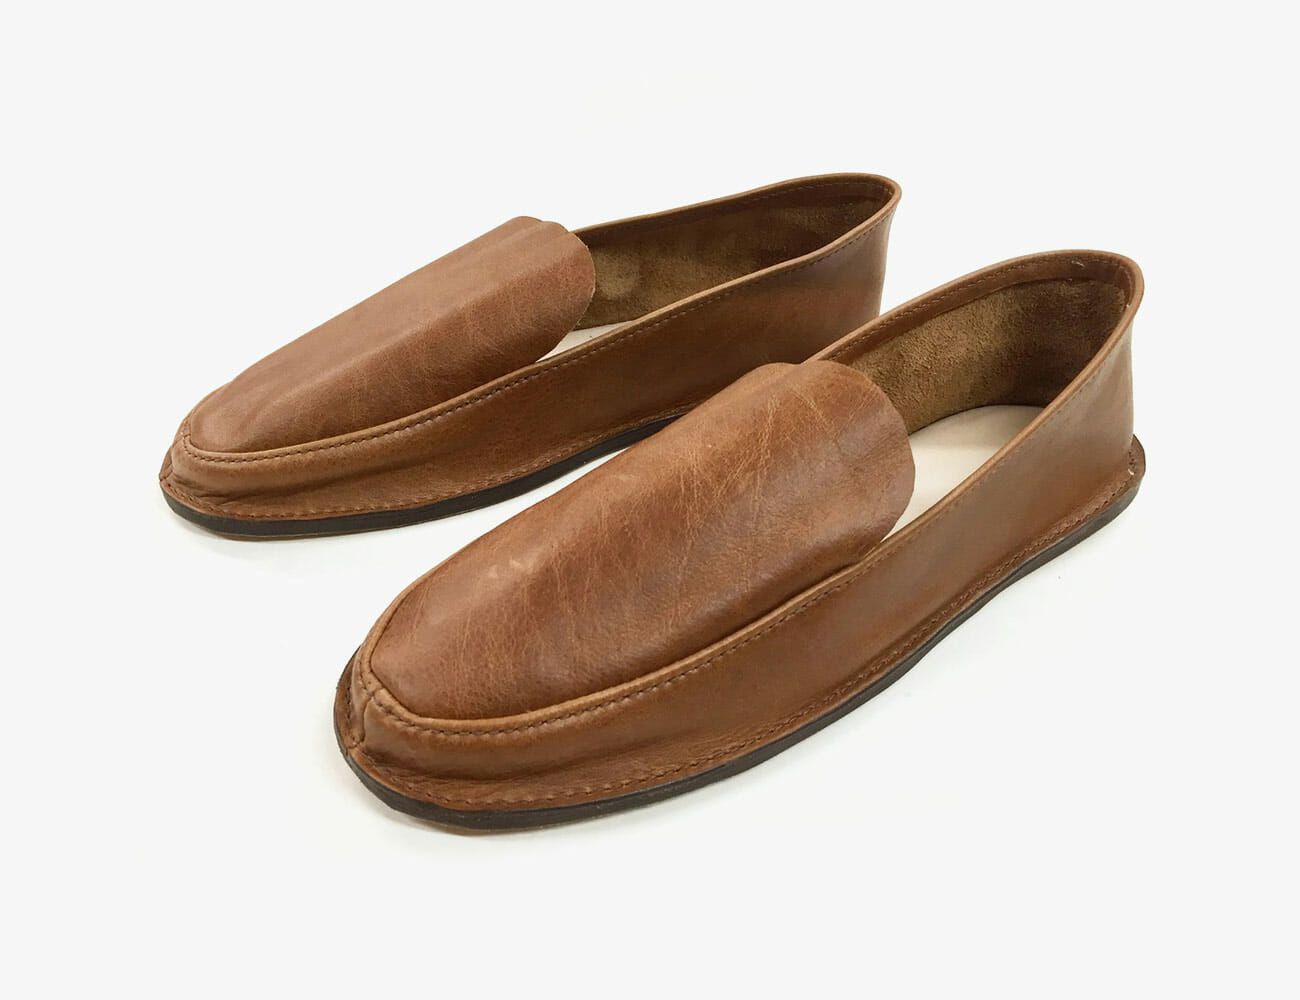 leather bedroom slippers